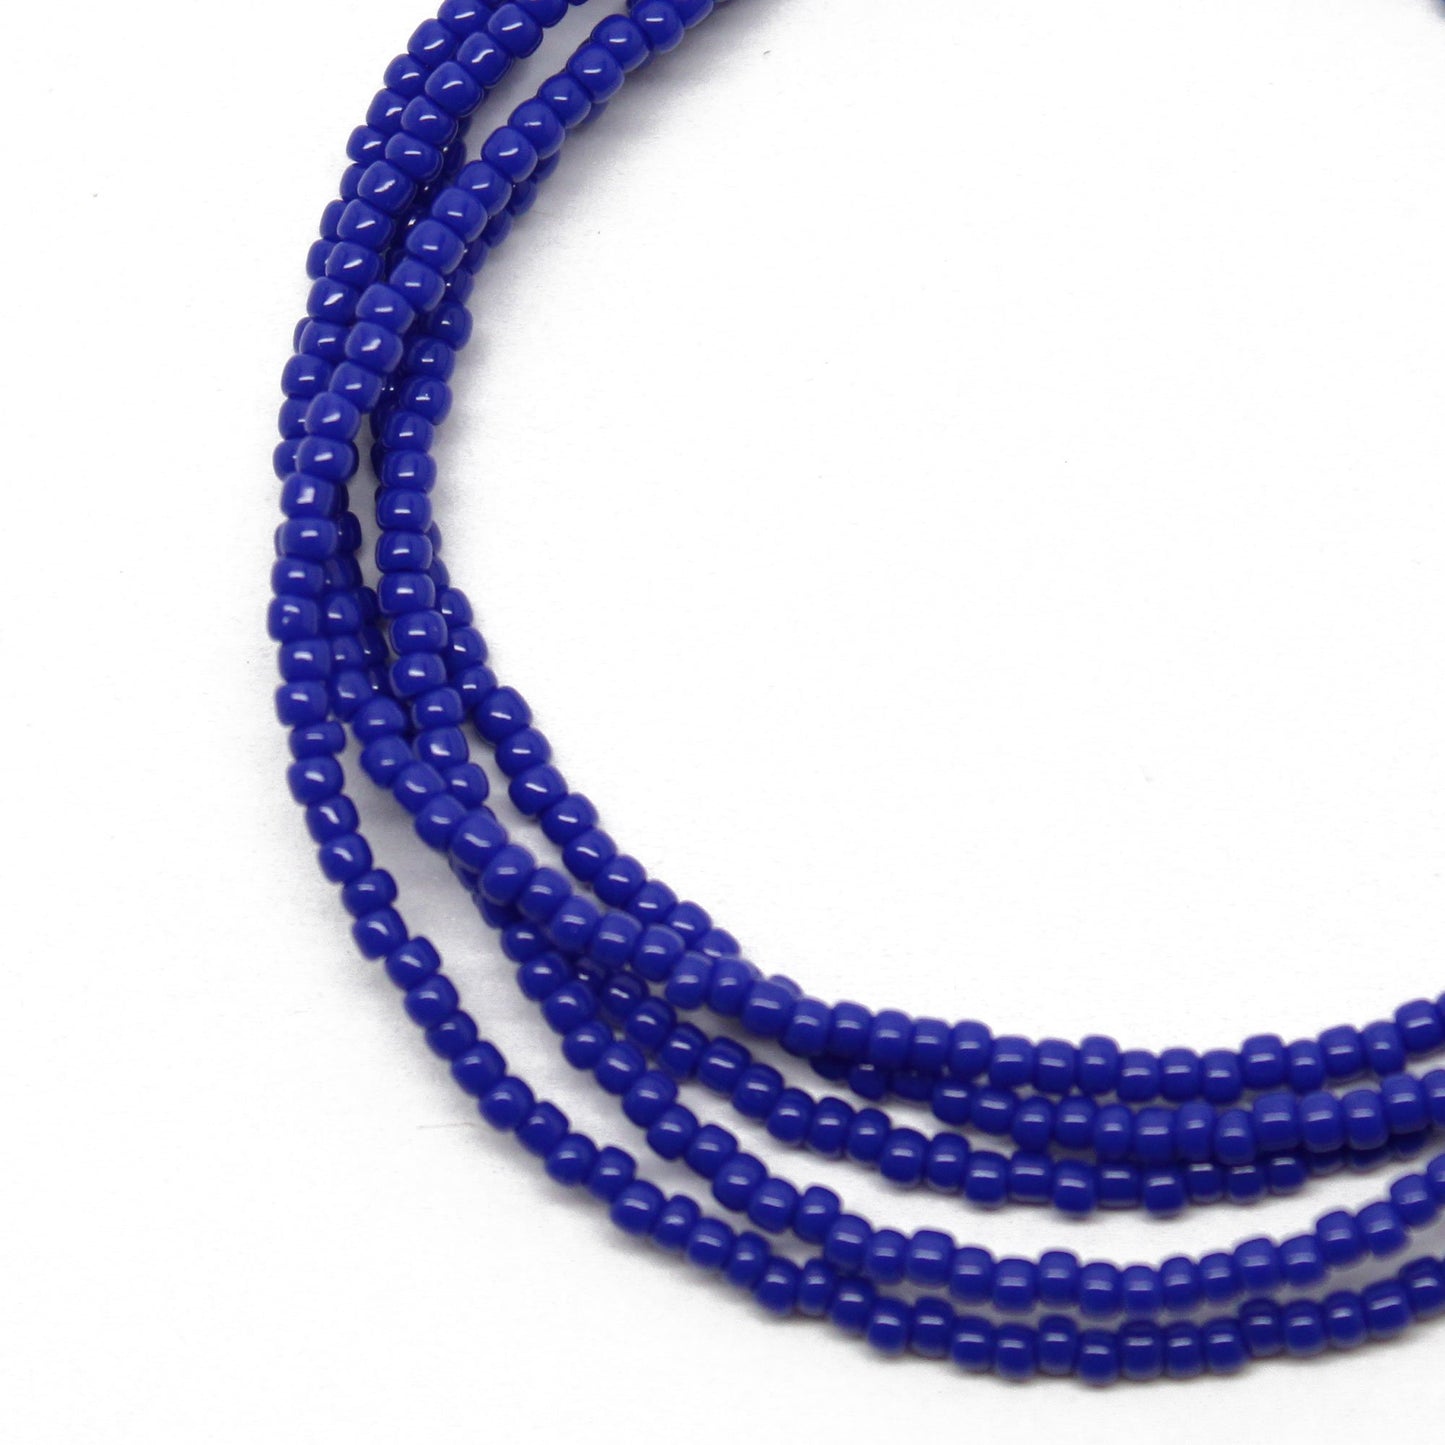 Blue Seed Bead Necklace-Navy Blue-Single Strand-11/0 Beads